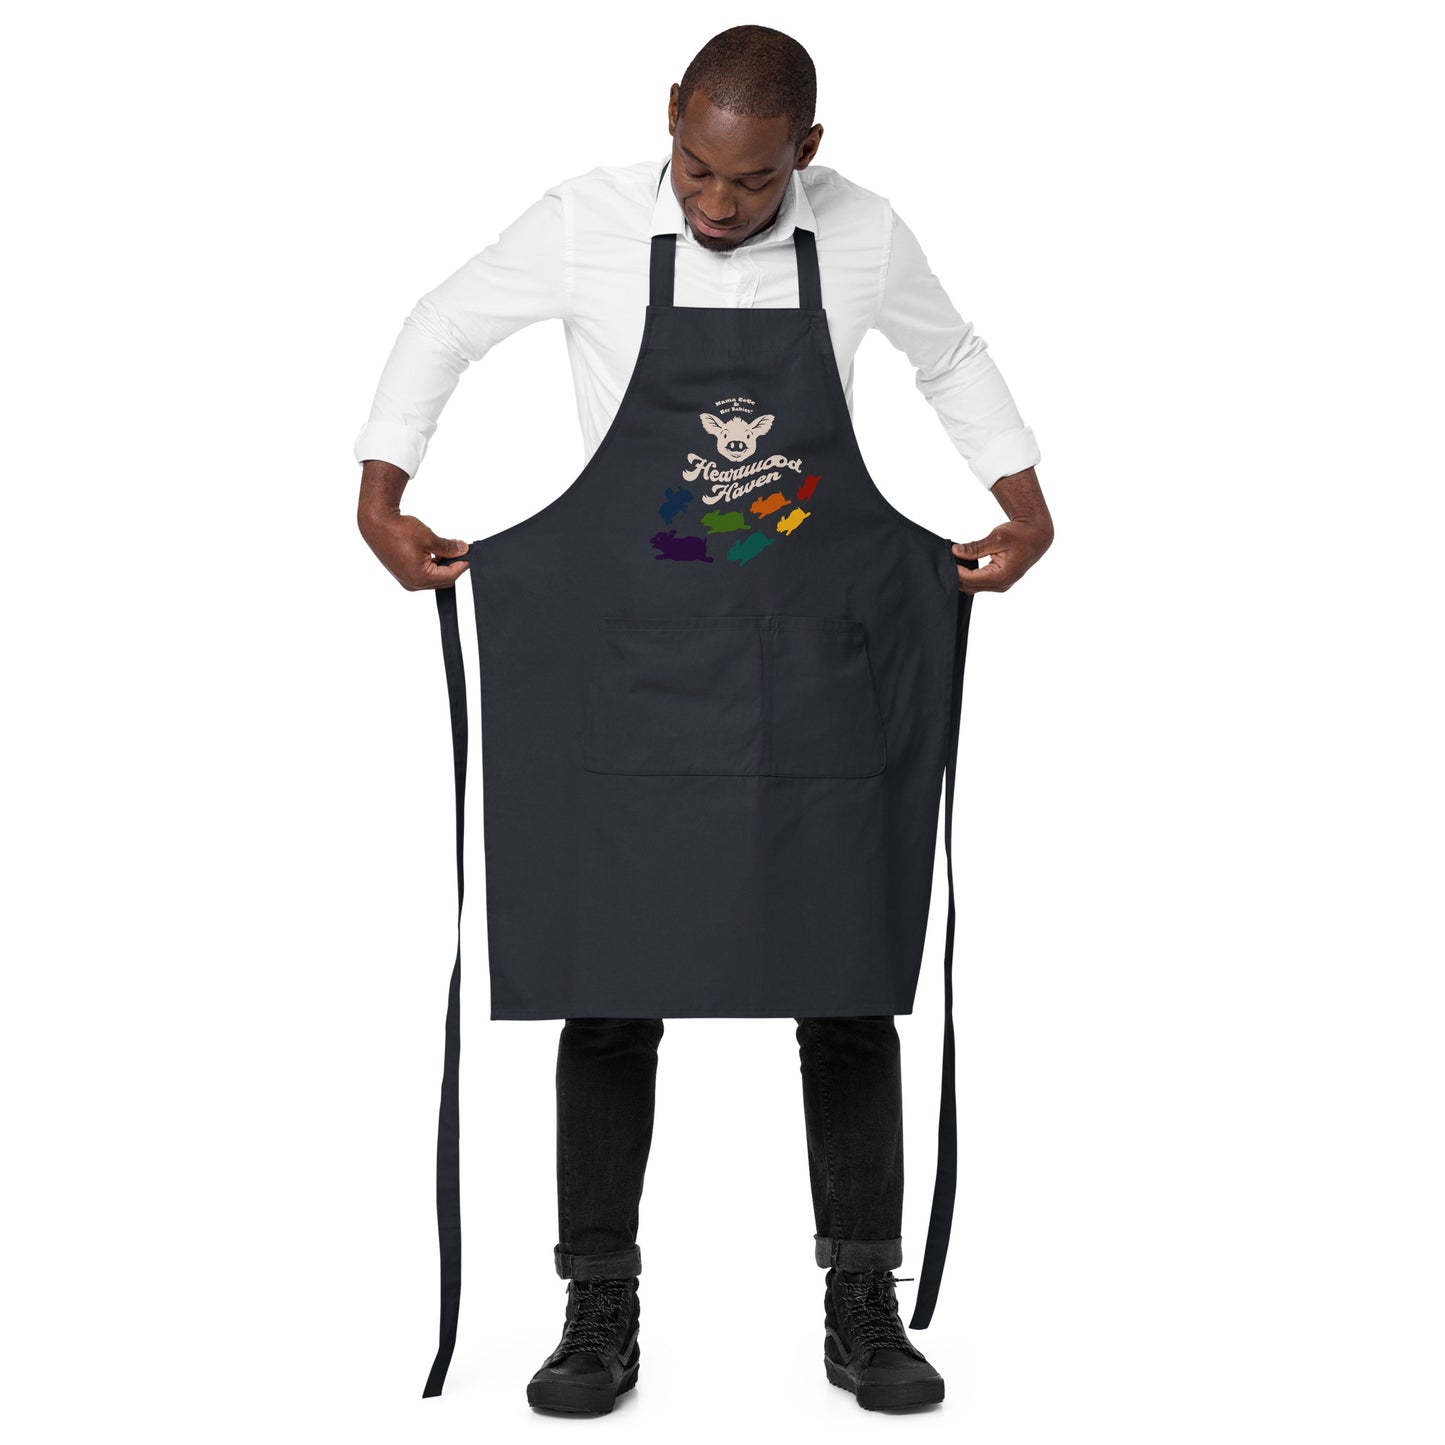 HEARTWOOD HAVEN - Mama CeCe & Her Babies - Organic cotton apron